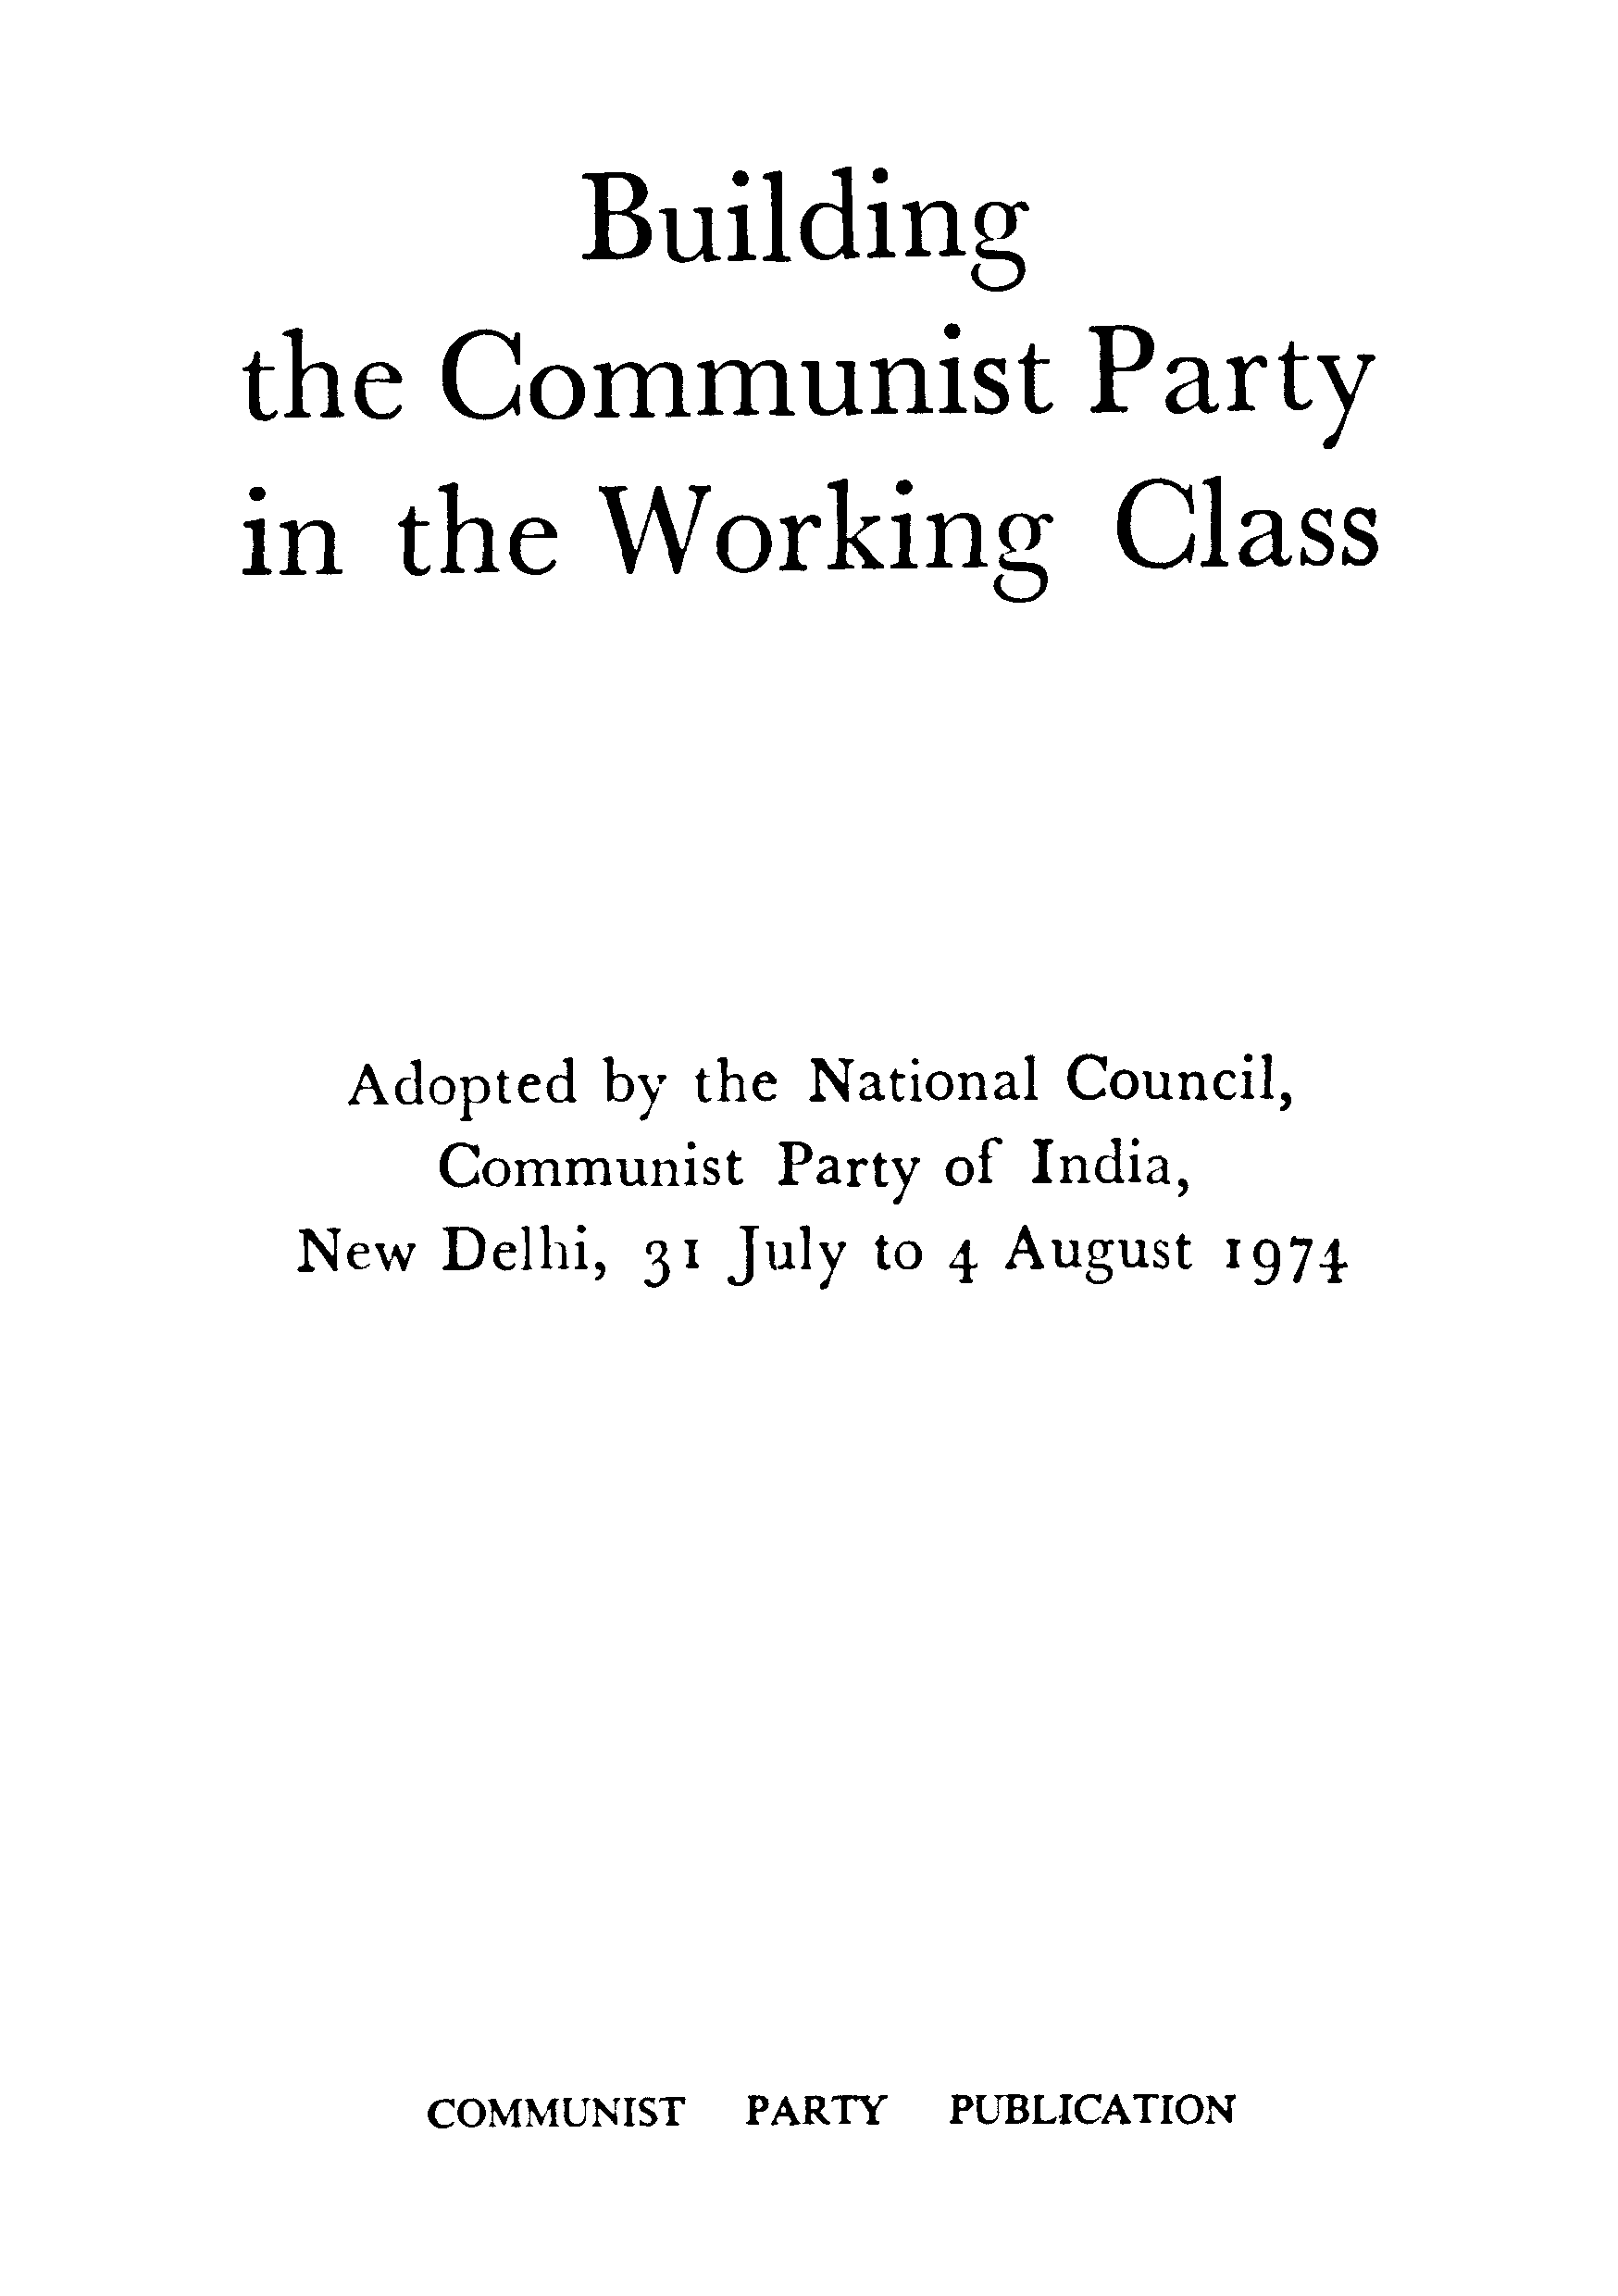 Building The Communist Party In The Working Class